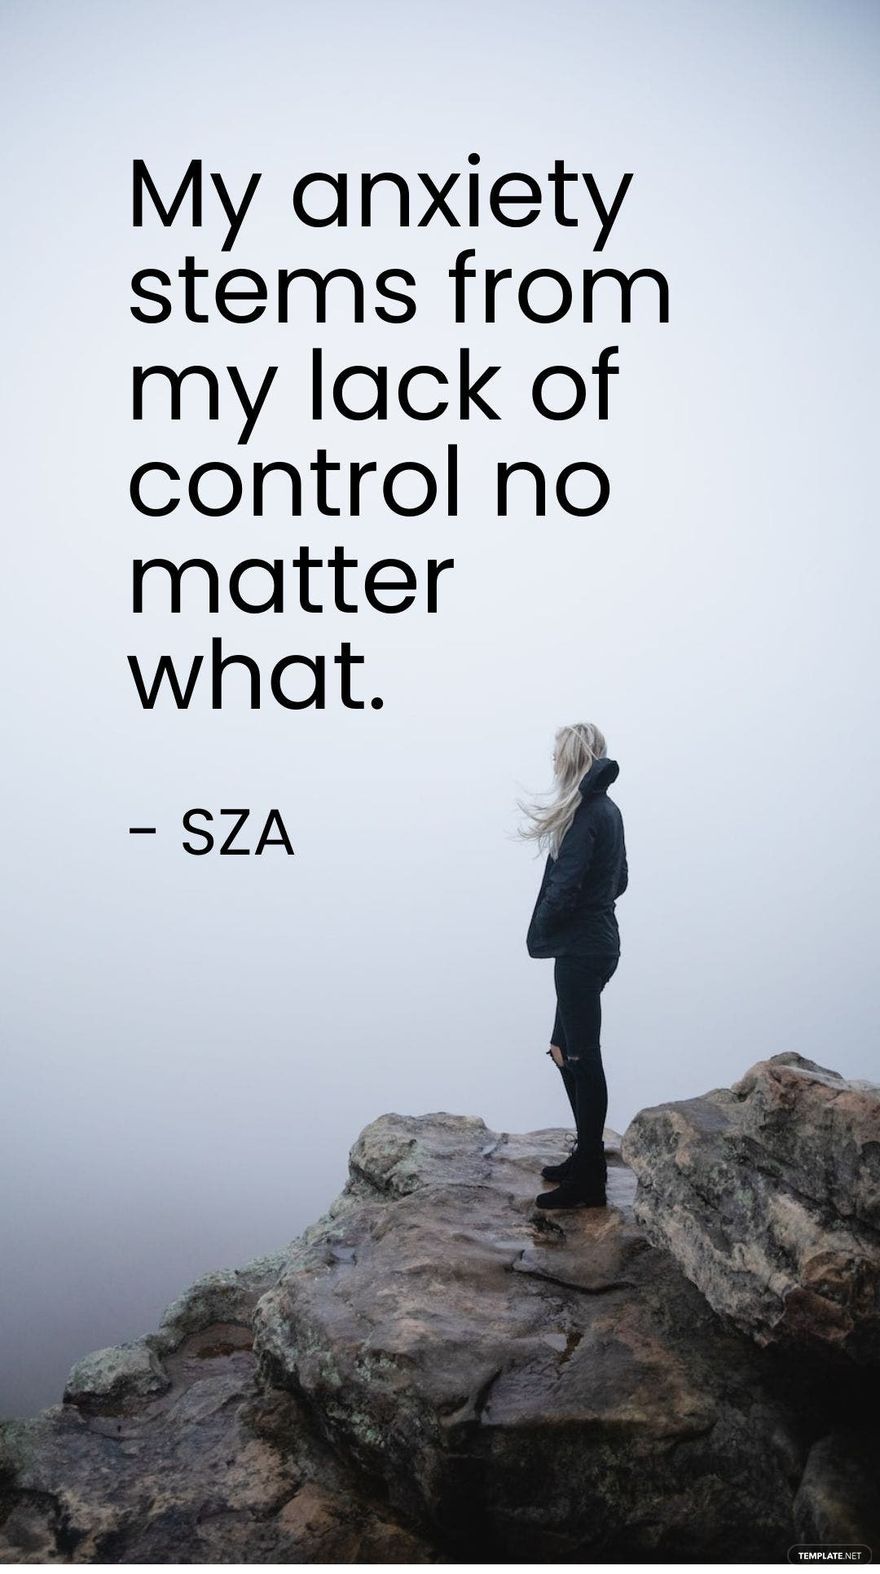 SZA - My anxiety stems from my lack of control no matter what.